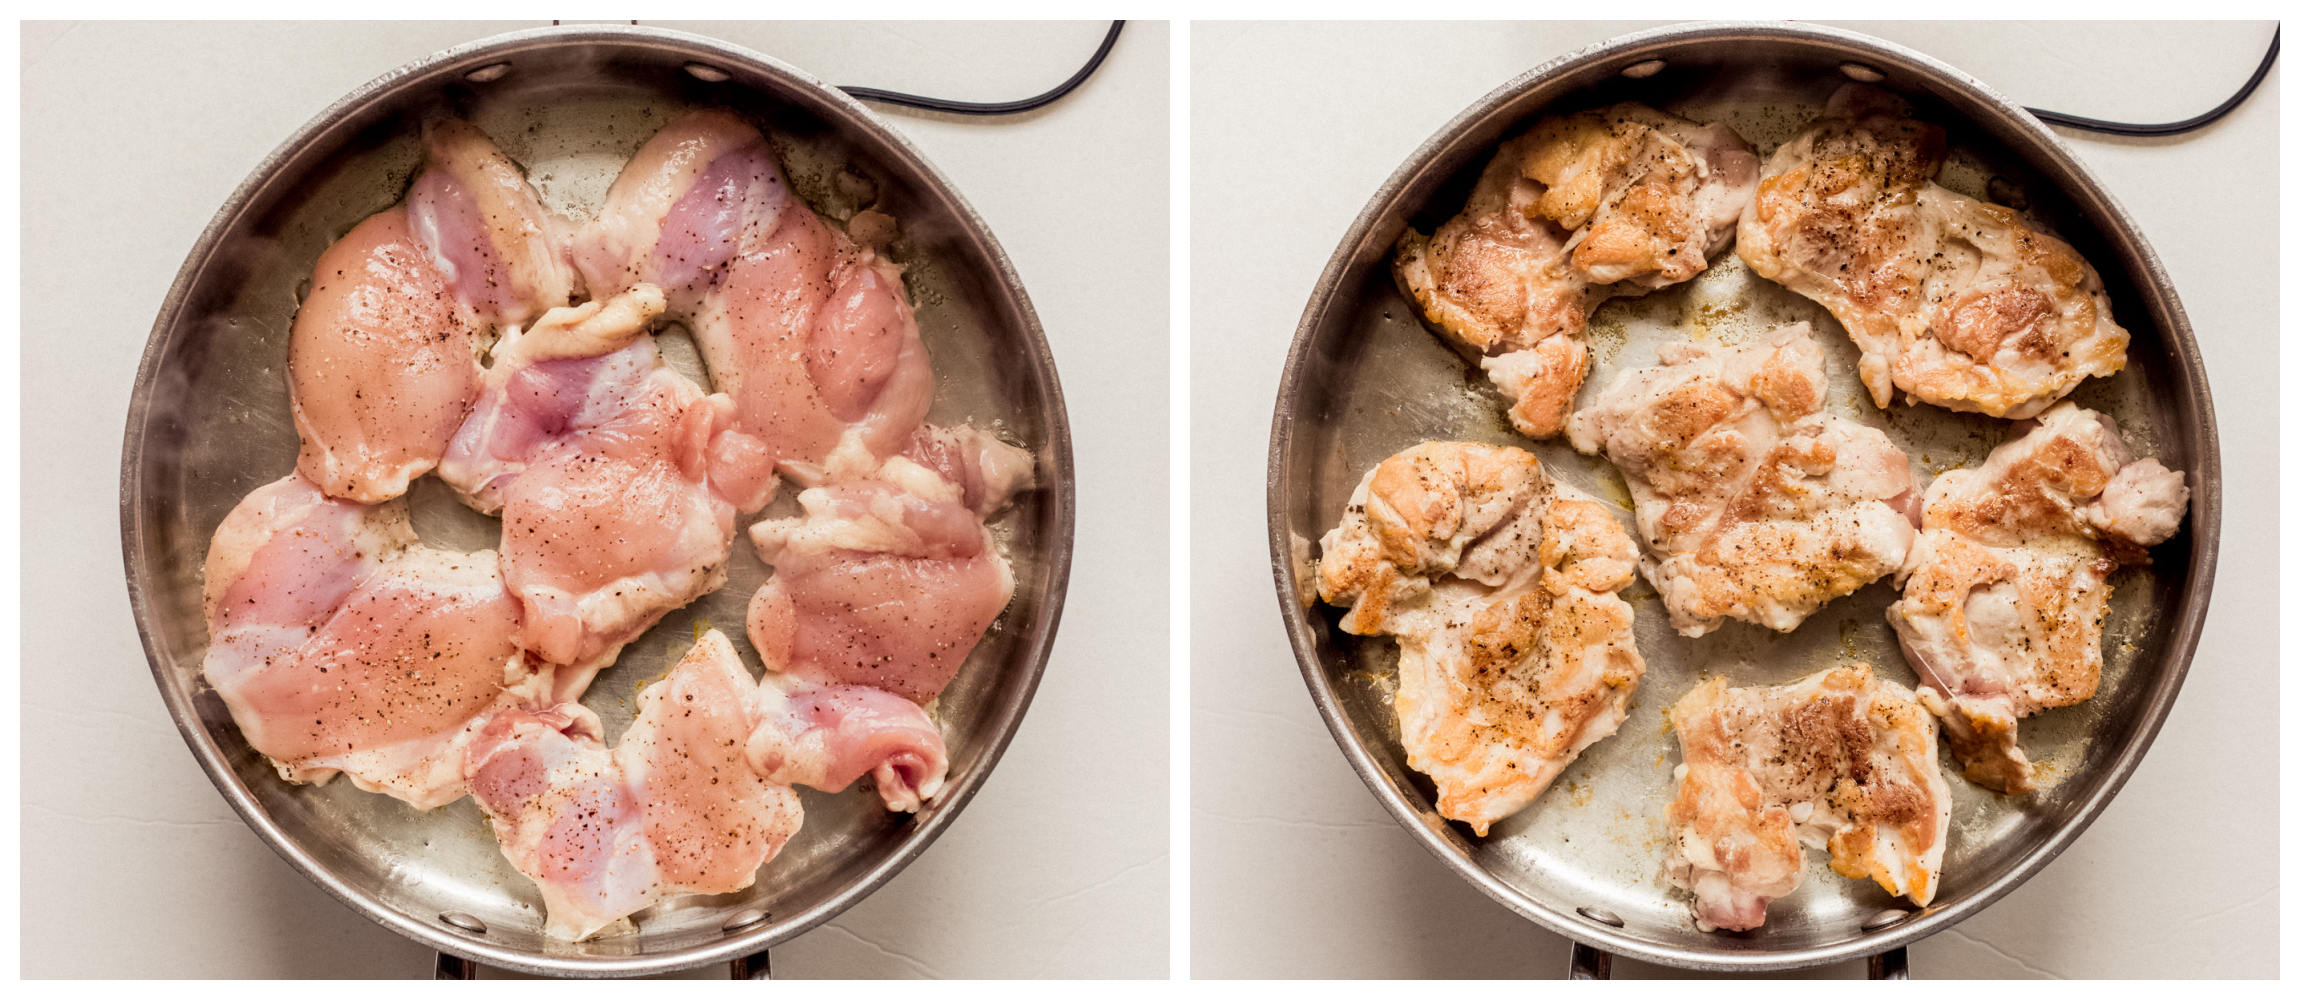 two skillet photos showing raw chicken thighs in one, and seared chicken thighs in second.